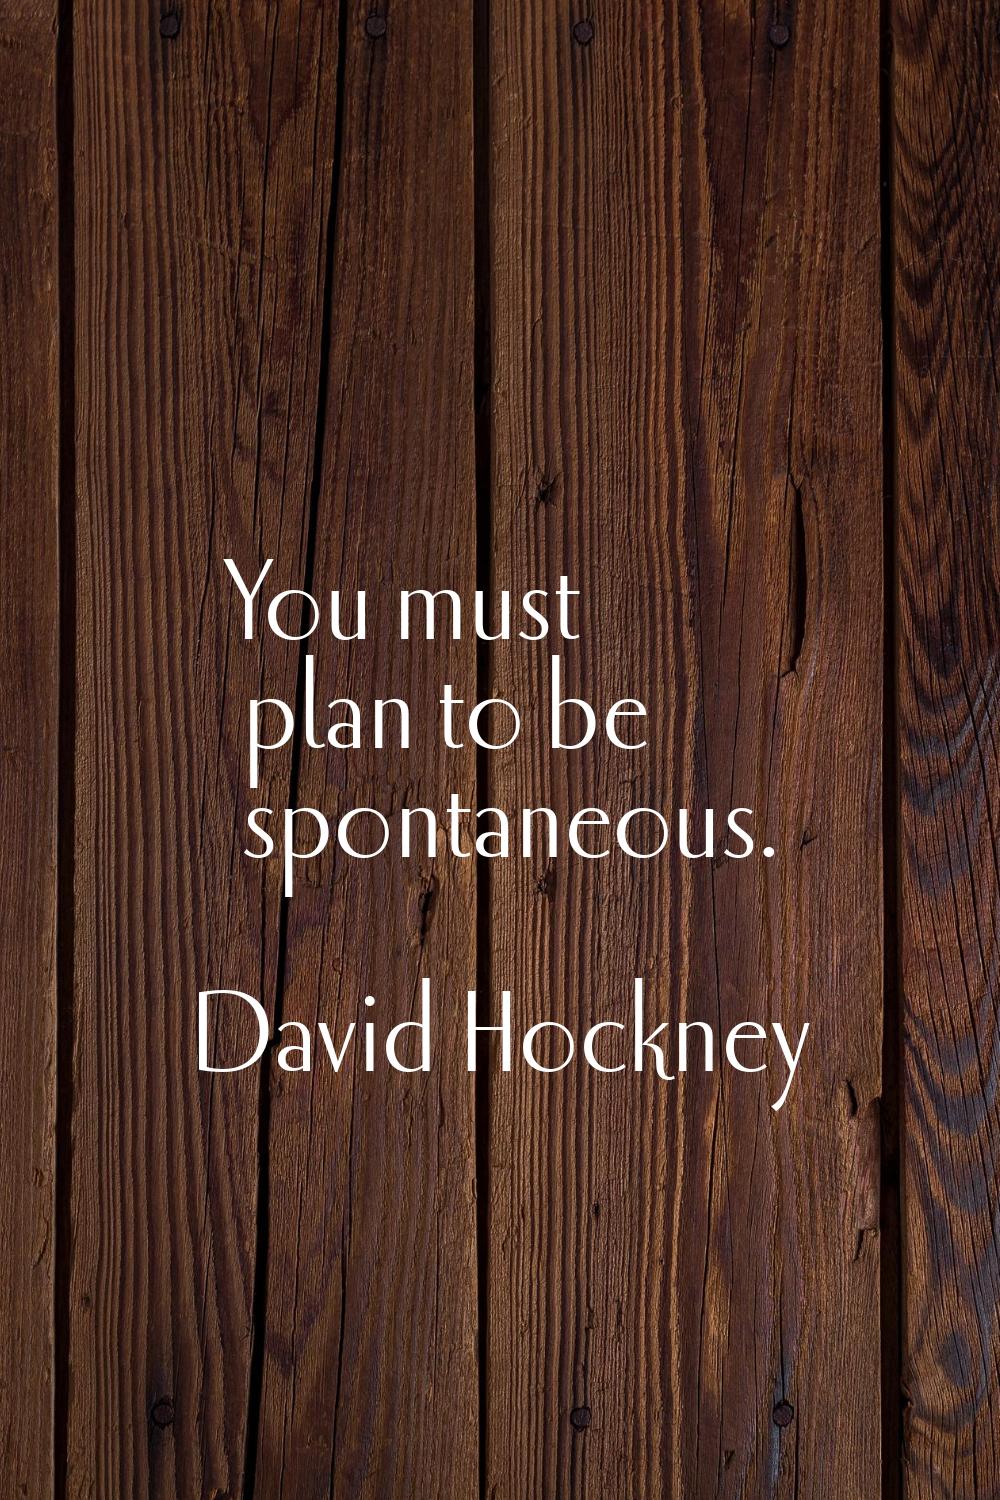 You must plan to be spontaneous.